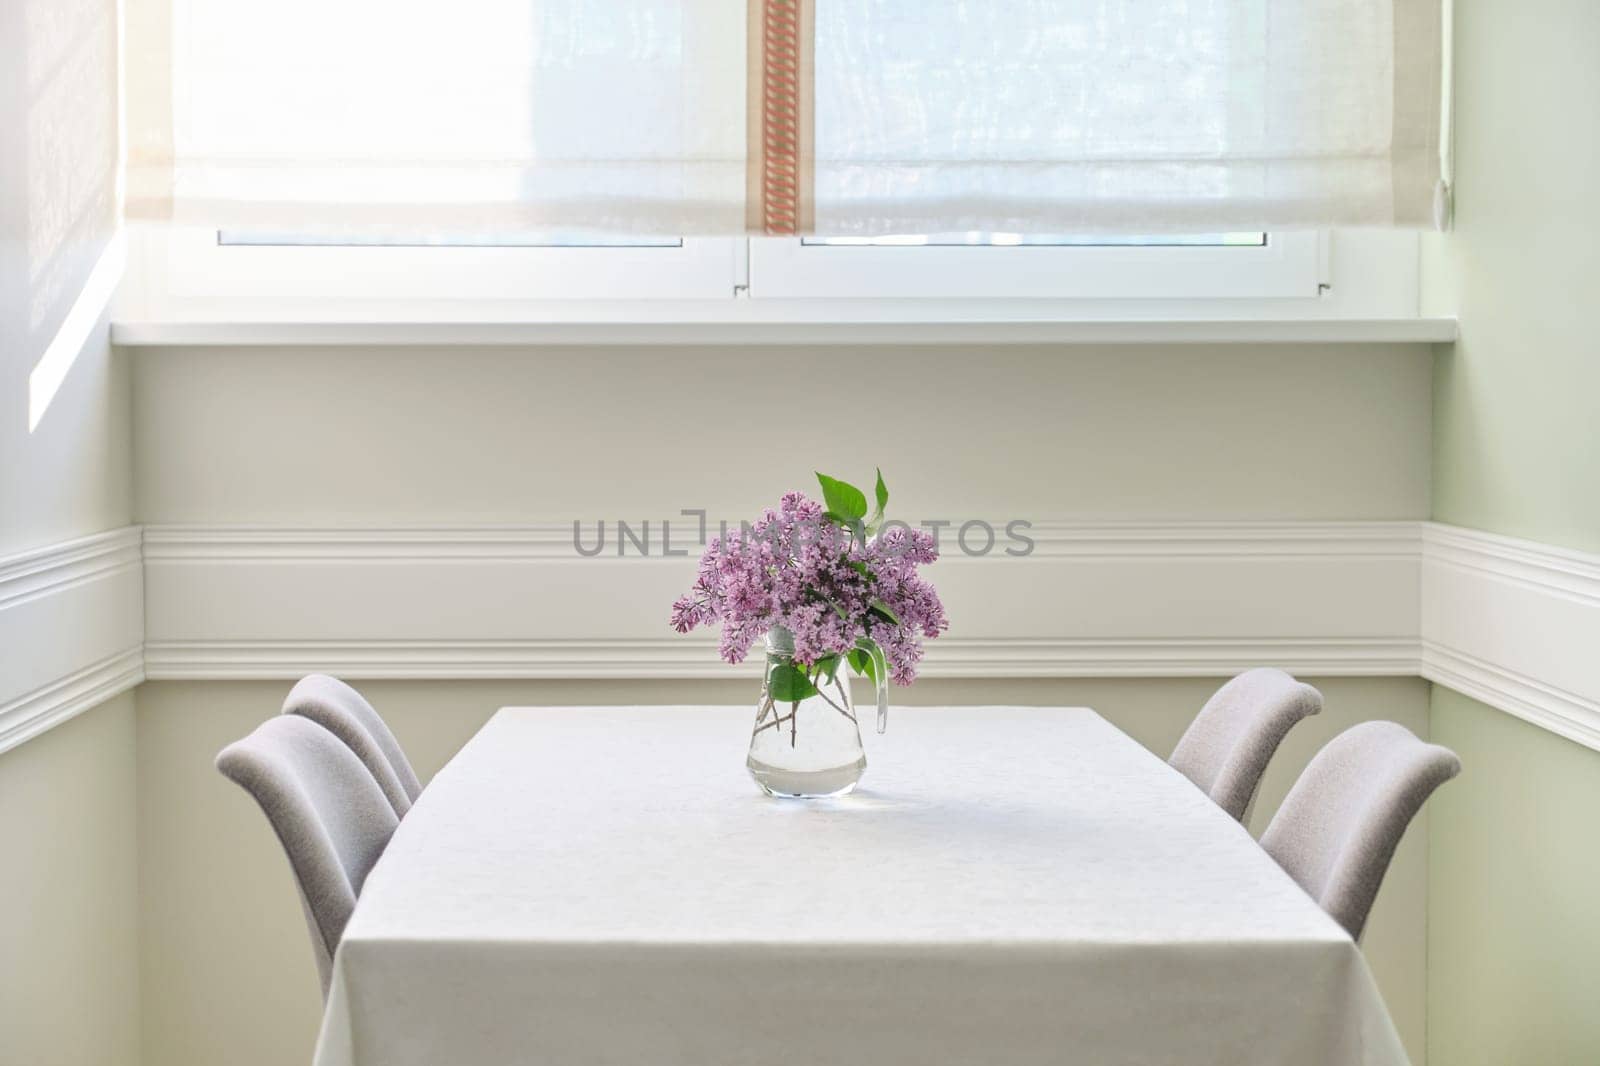 Living room dining area with 4 chairs near window, bouquet of lilac flowers on the table on white tablecloth. Home interior decor